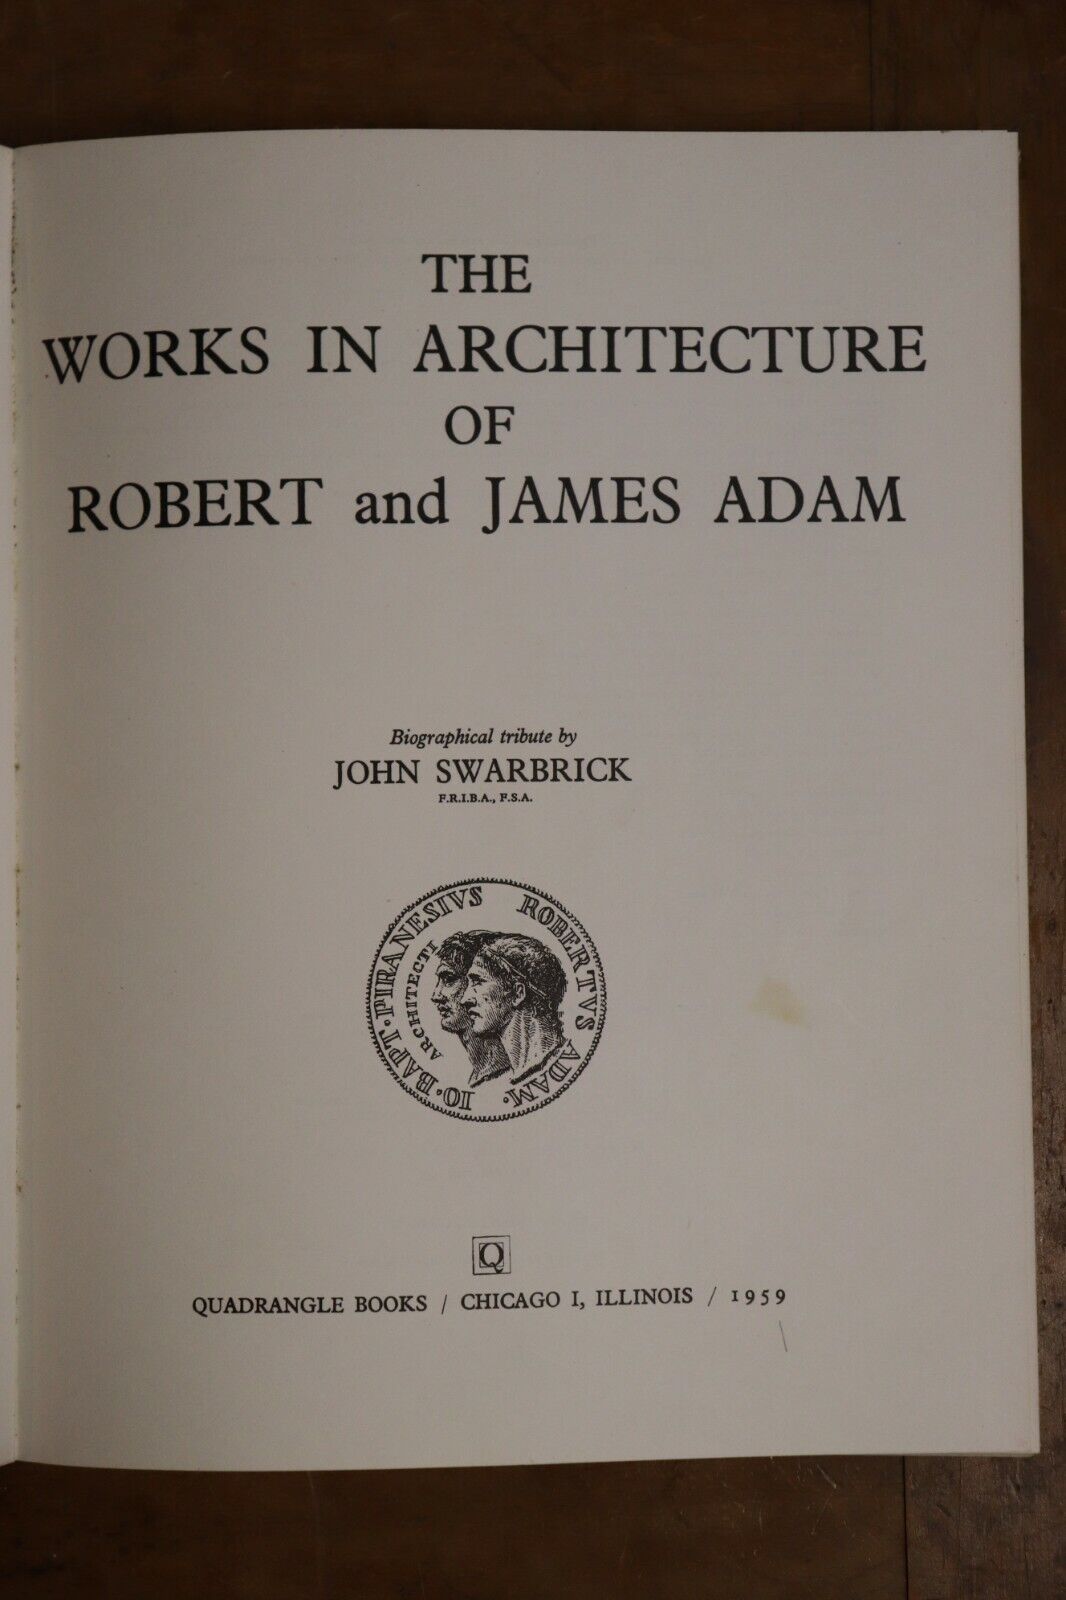 Works In Architecture of R&J Adams - 1959 - 1st Edition Antique Book - 0